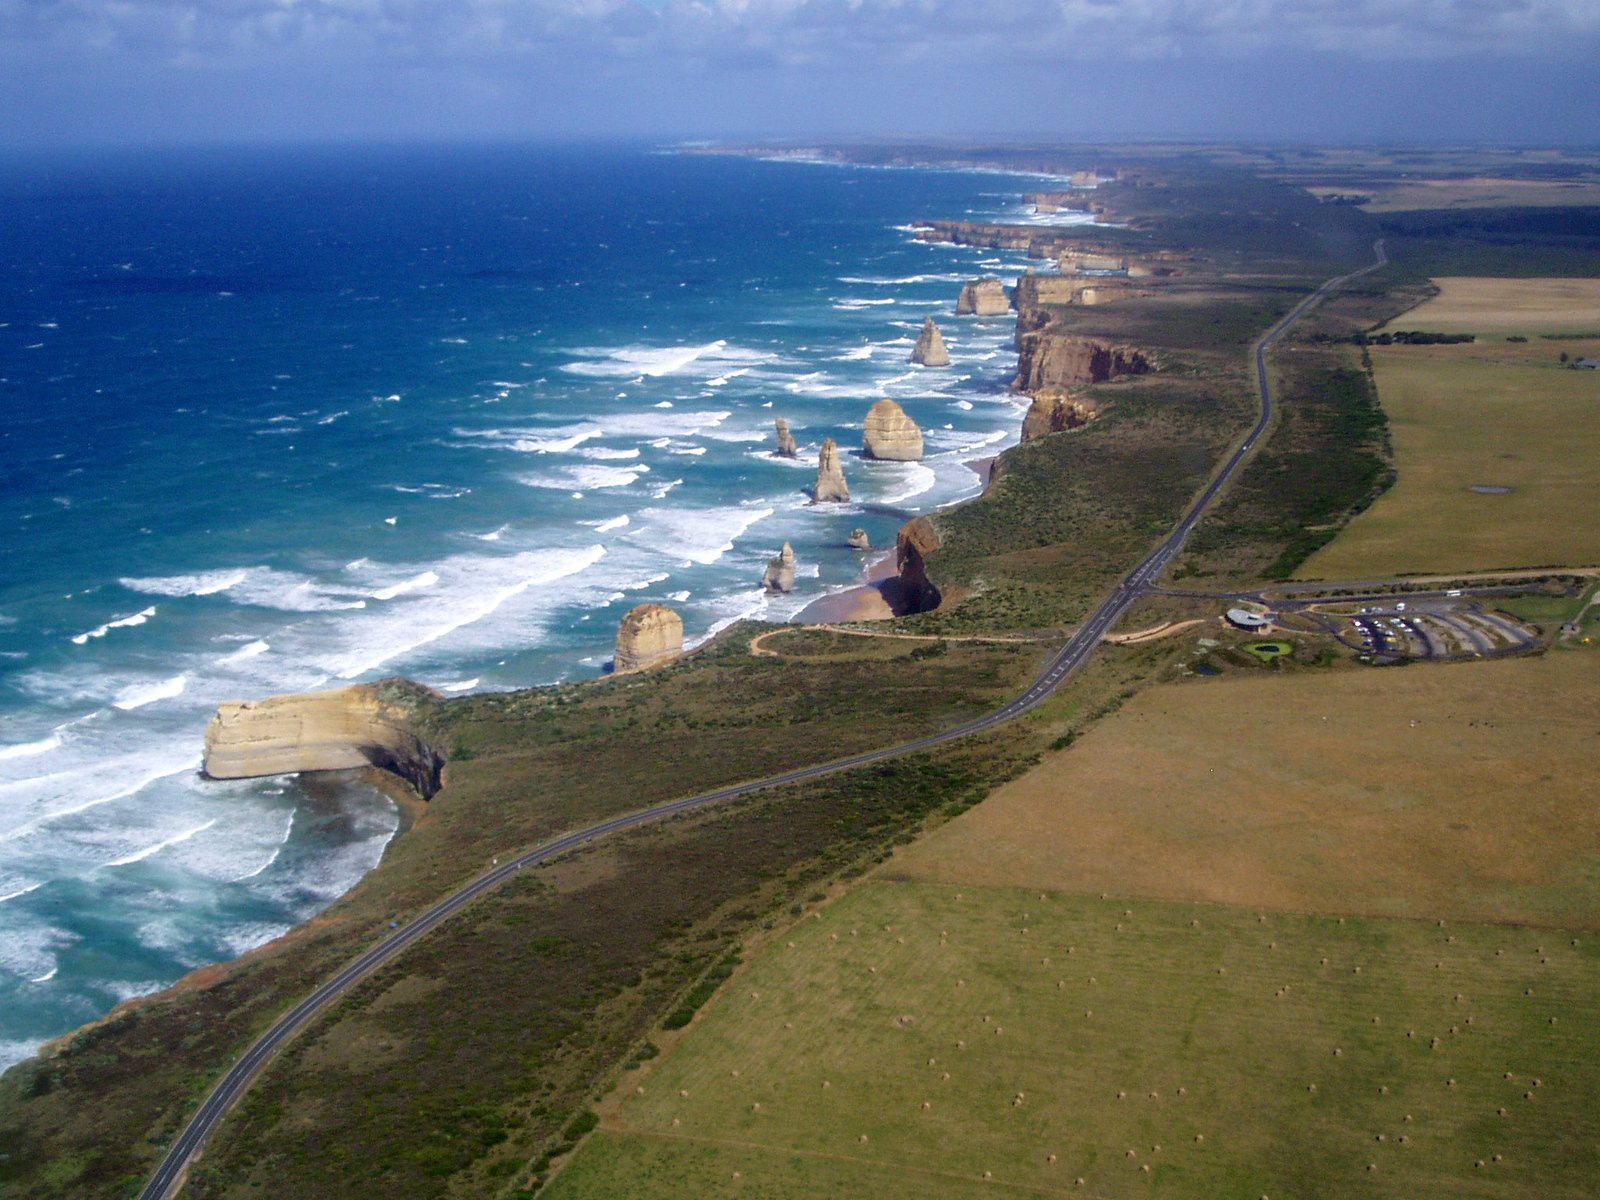 a scenic, scenic coastal view with great ocean views